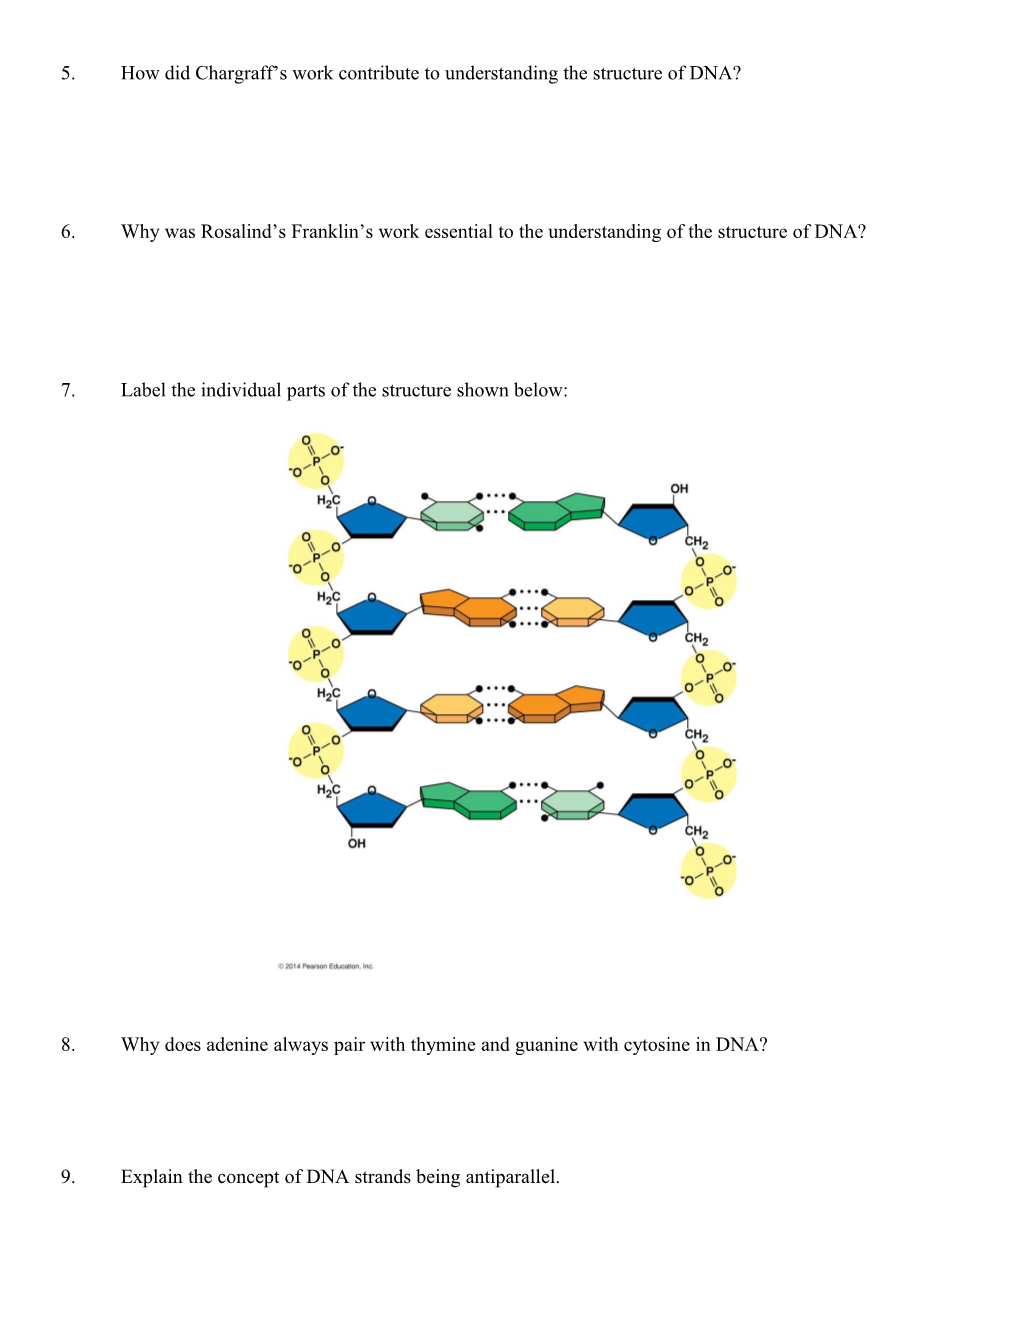 Chapter 1: Molecular Basis of Inheritance Guided Reading